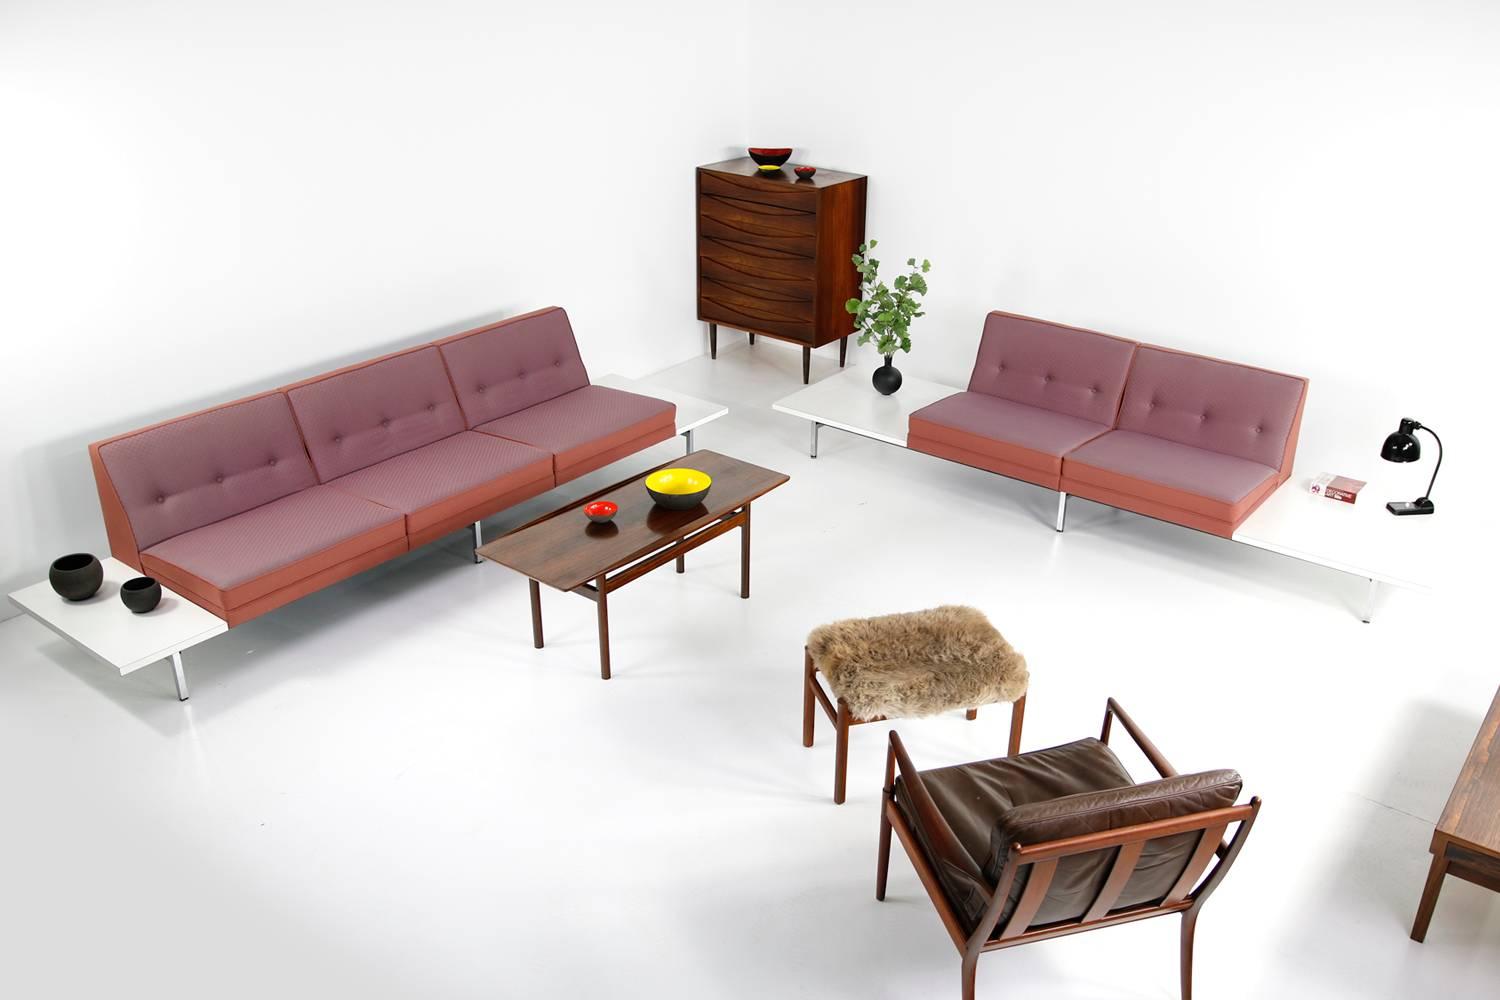 1970s George Nelson Modular Sofa and Tables Landscape Seating Herman Miller im Angebot 2